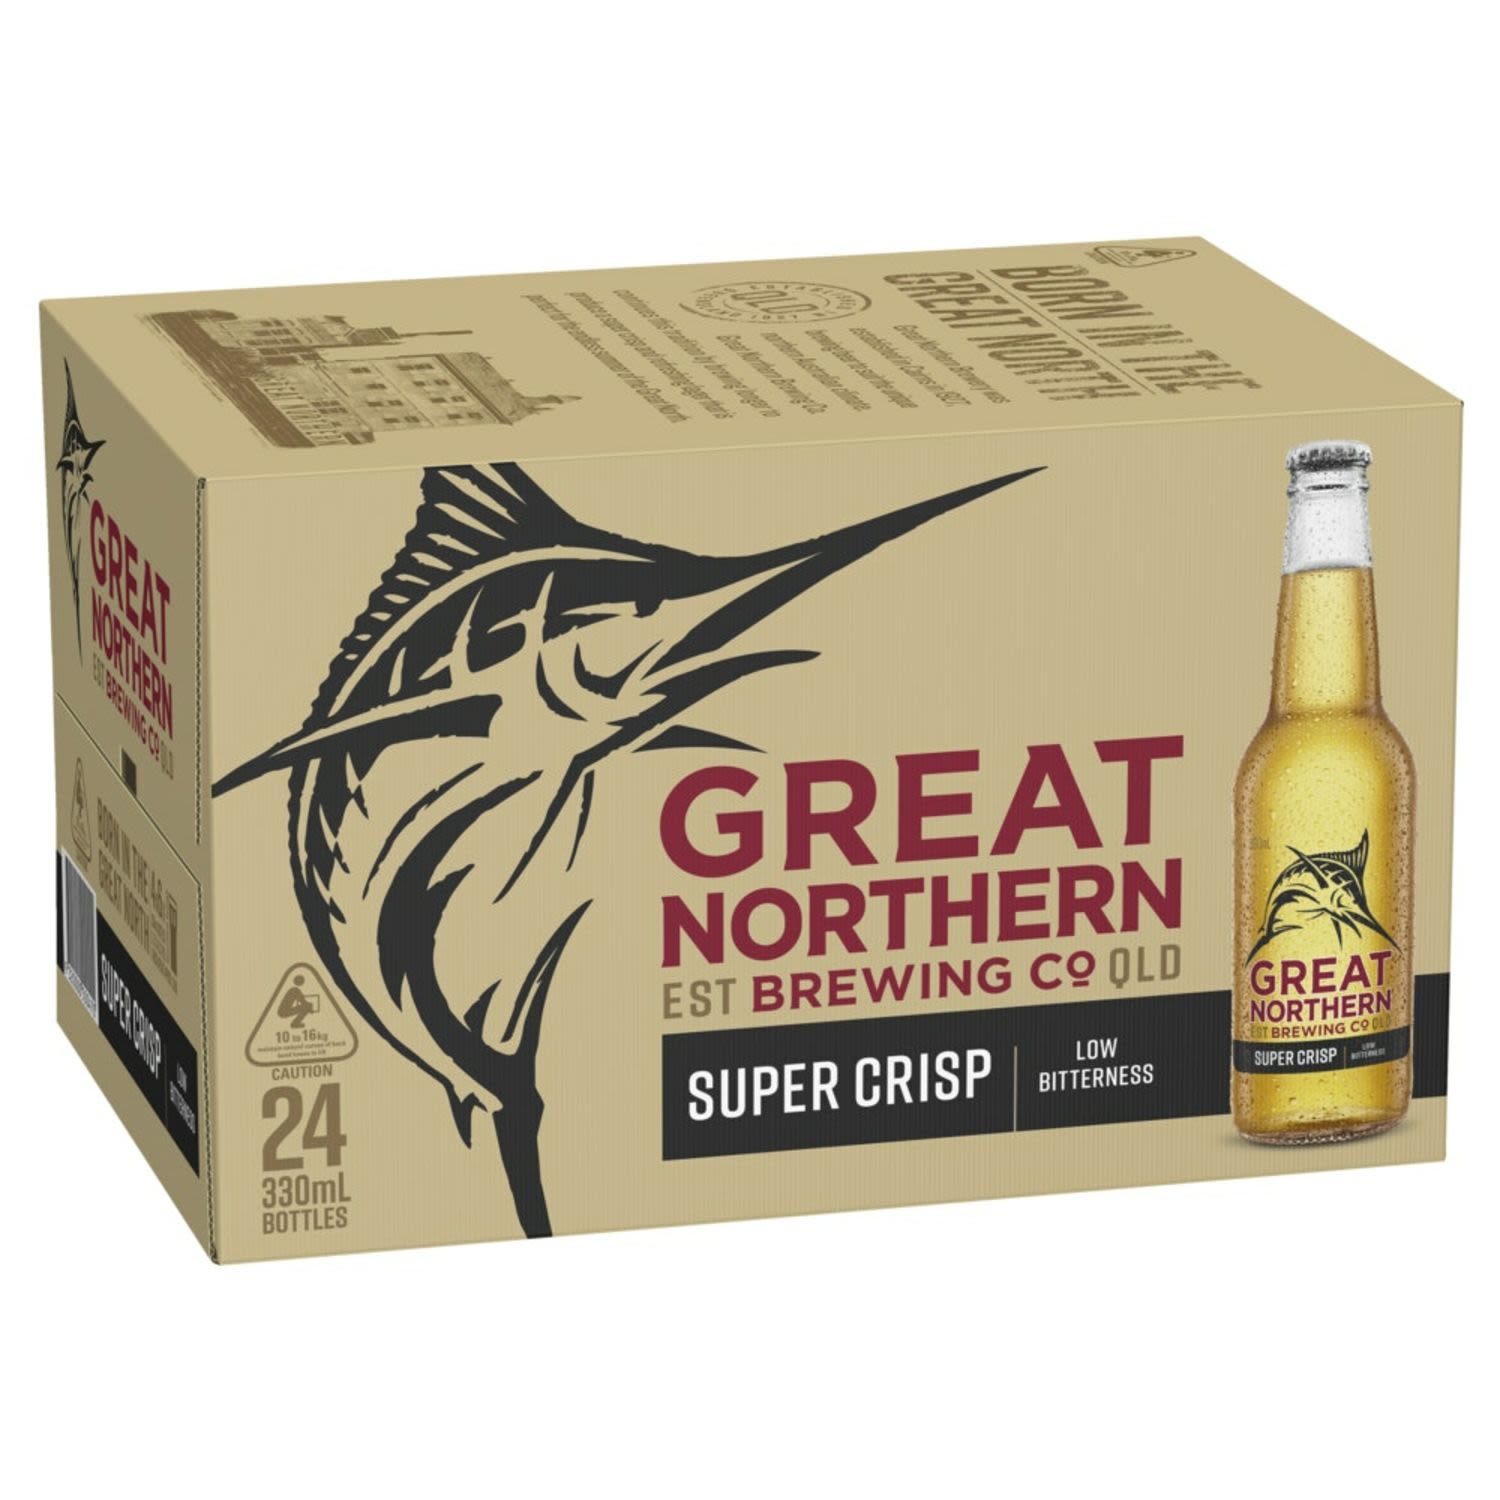 The Great Northern Brewing Company Super Crisp Lager has been created by Queenslanders, for Queenslanders. They have brought together local brewers, industry identities and beer lovers to help create the perfect Queensland brew, one that captures the Queensland adventure of sun, sand and fishing.<br /> <br />Alcohol Volume: 3.50%<br /><br />Pack Format: 24 Pack<br /><br />Standard Drinks: 0.9<br /><br />Pack Type: Bottle<br /><br />Country of Origin: Australia<br />